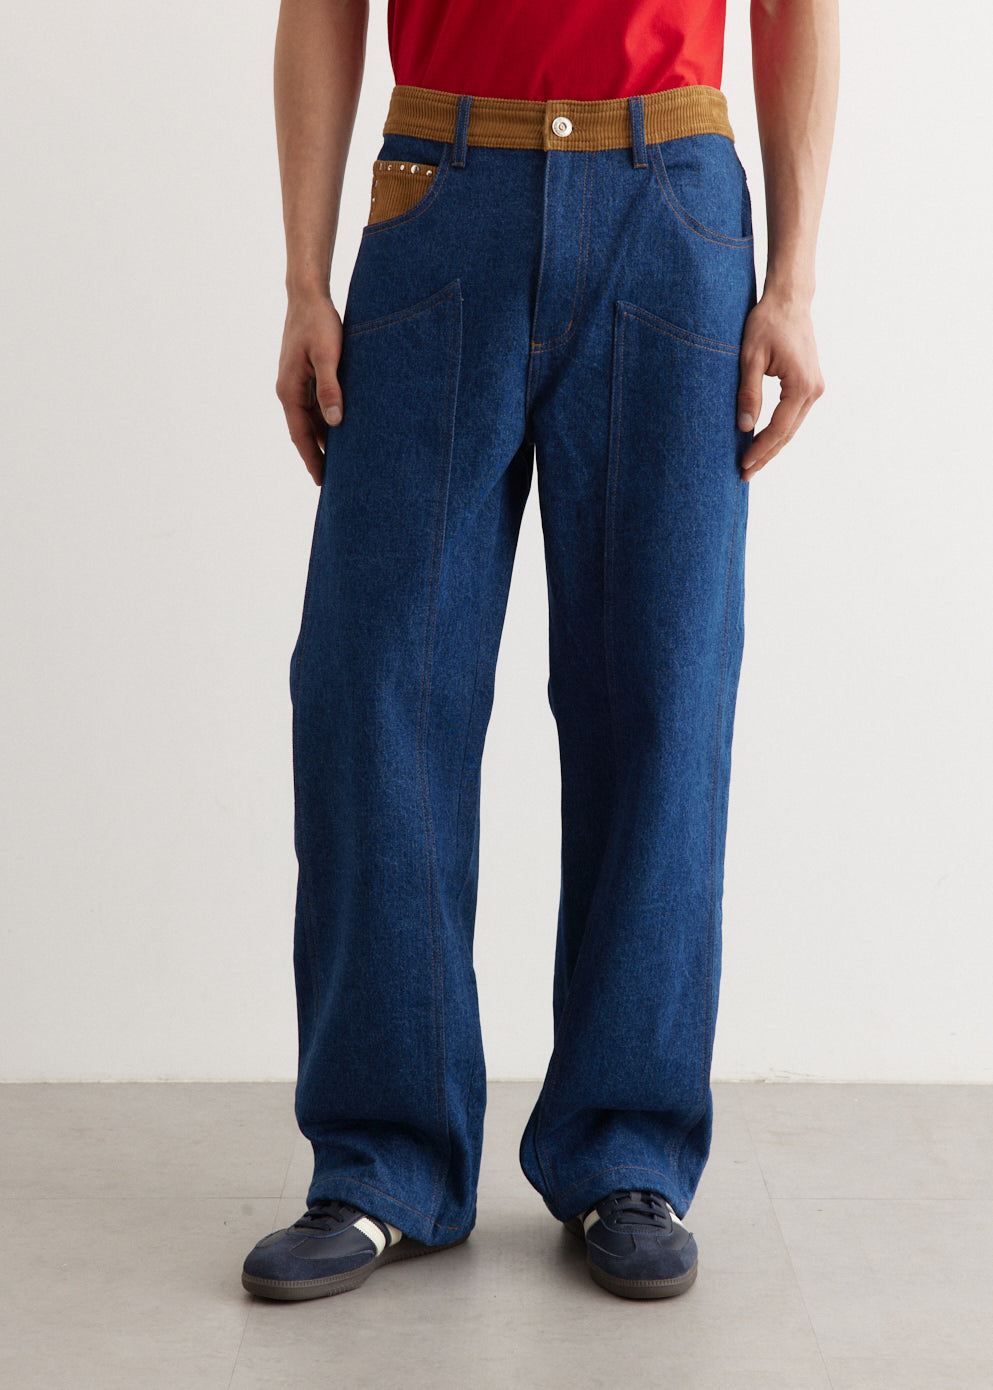 Cymbal Jeans